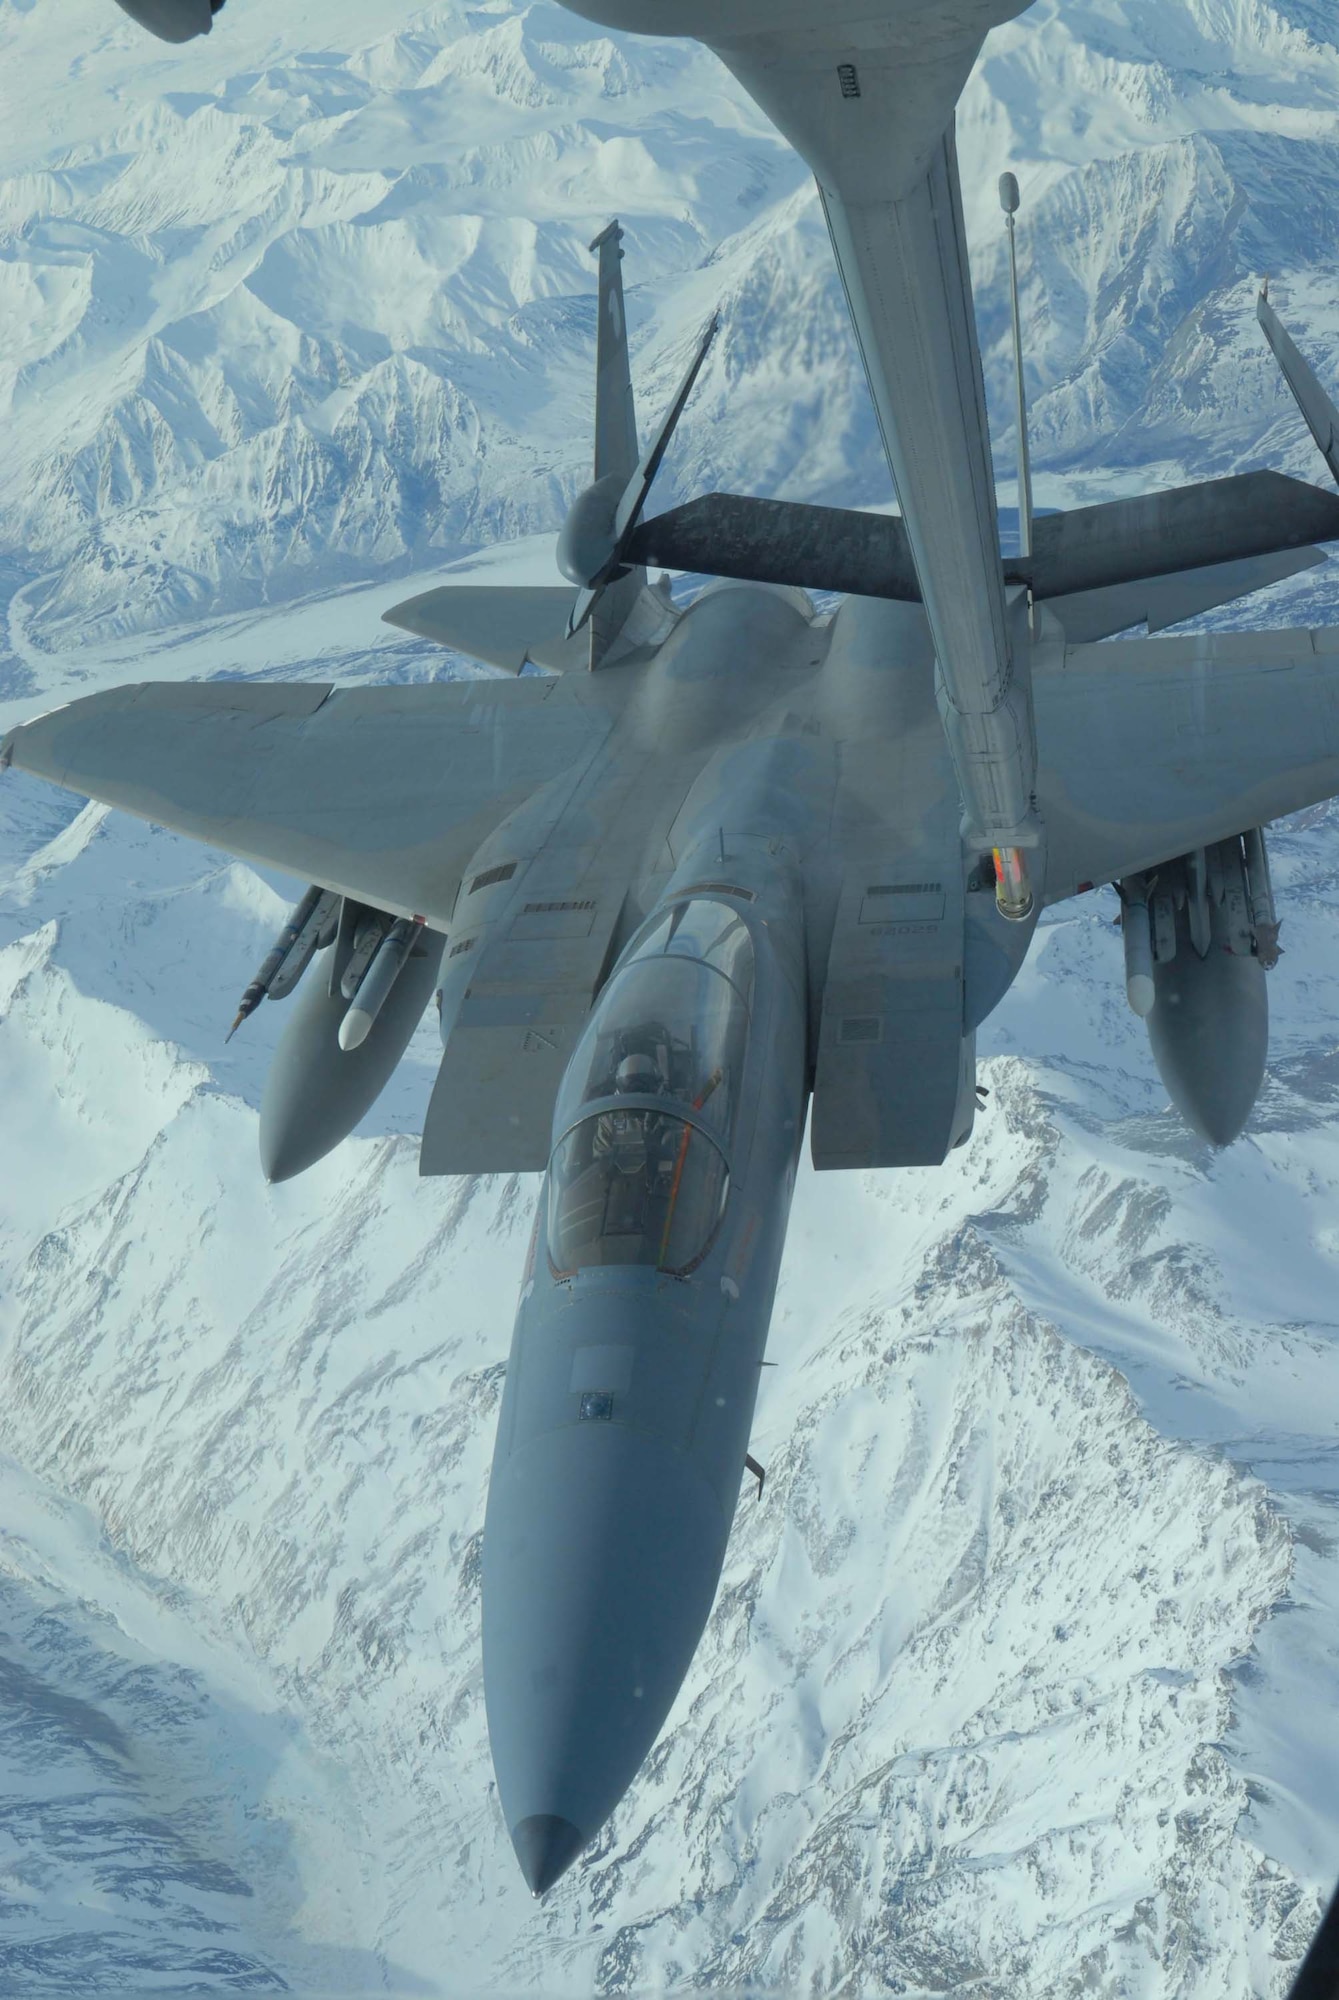 EIELSON AIR FORCE BASE, Alaska -- An F-15 Strike Eagle, 60th Fighter Squadron, Eglin AFB, Florida, positions itself to make contact with a KC-10 extender over the Pacific Alaska Range Complex on April 18 during Red Flag-Alaska 07-1. Red Flag-Alaska is a Pacific Air Forces-directed field training exercise for U.S. forces flown under simulated air combat conditions. It is conducted on the Pacific Alaskan Range Complex with air operations flown out of Eielson and Elmendorf Air Force Bases. (U.S. Air Force Photo by Airman 1st Class Jonathan Snyder) (Released)